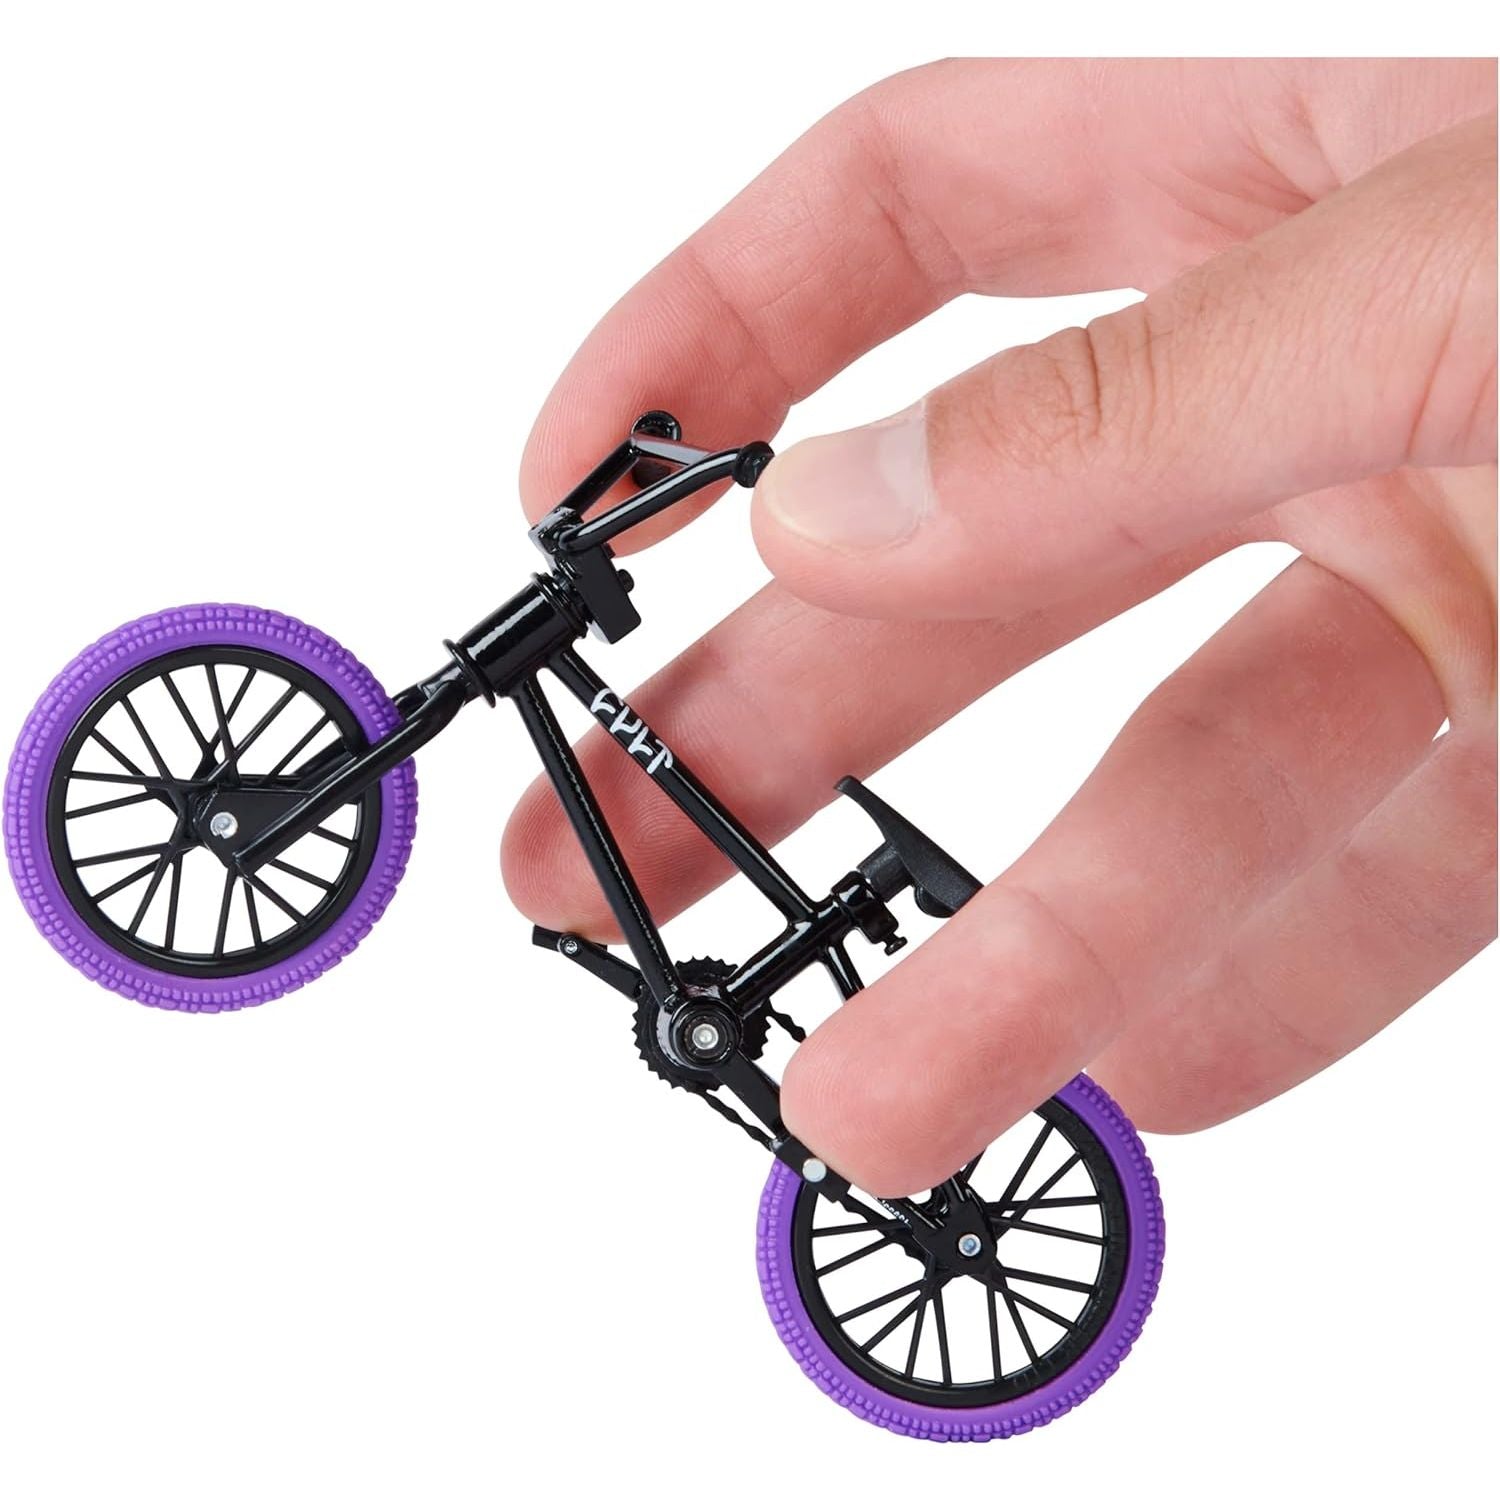 Tech Deck, BMX Finger Bike 3-Pack, Collectible and Customizable Mini BMX Bicycle Toys for Collectors